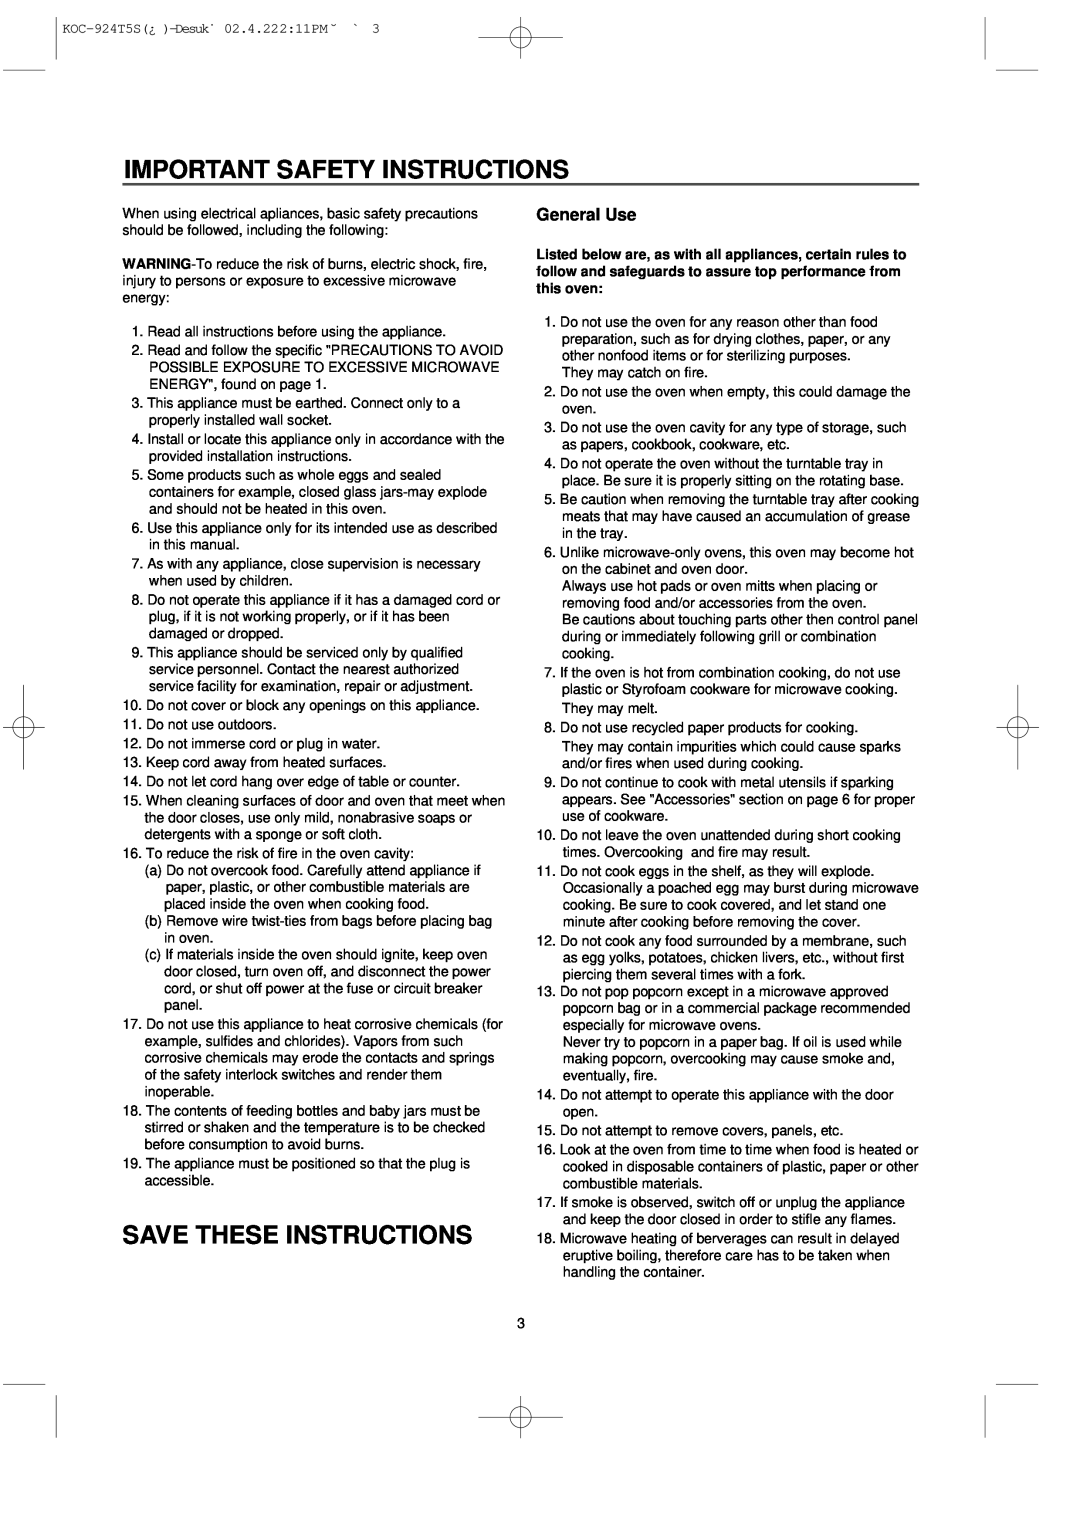 Daewoo KOC-924T owner manual Important Safety Instructions, Save These Instructions, General Use 